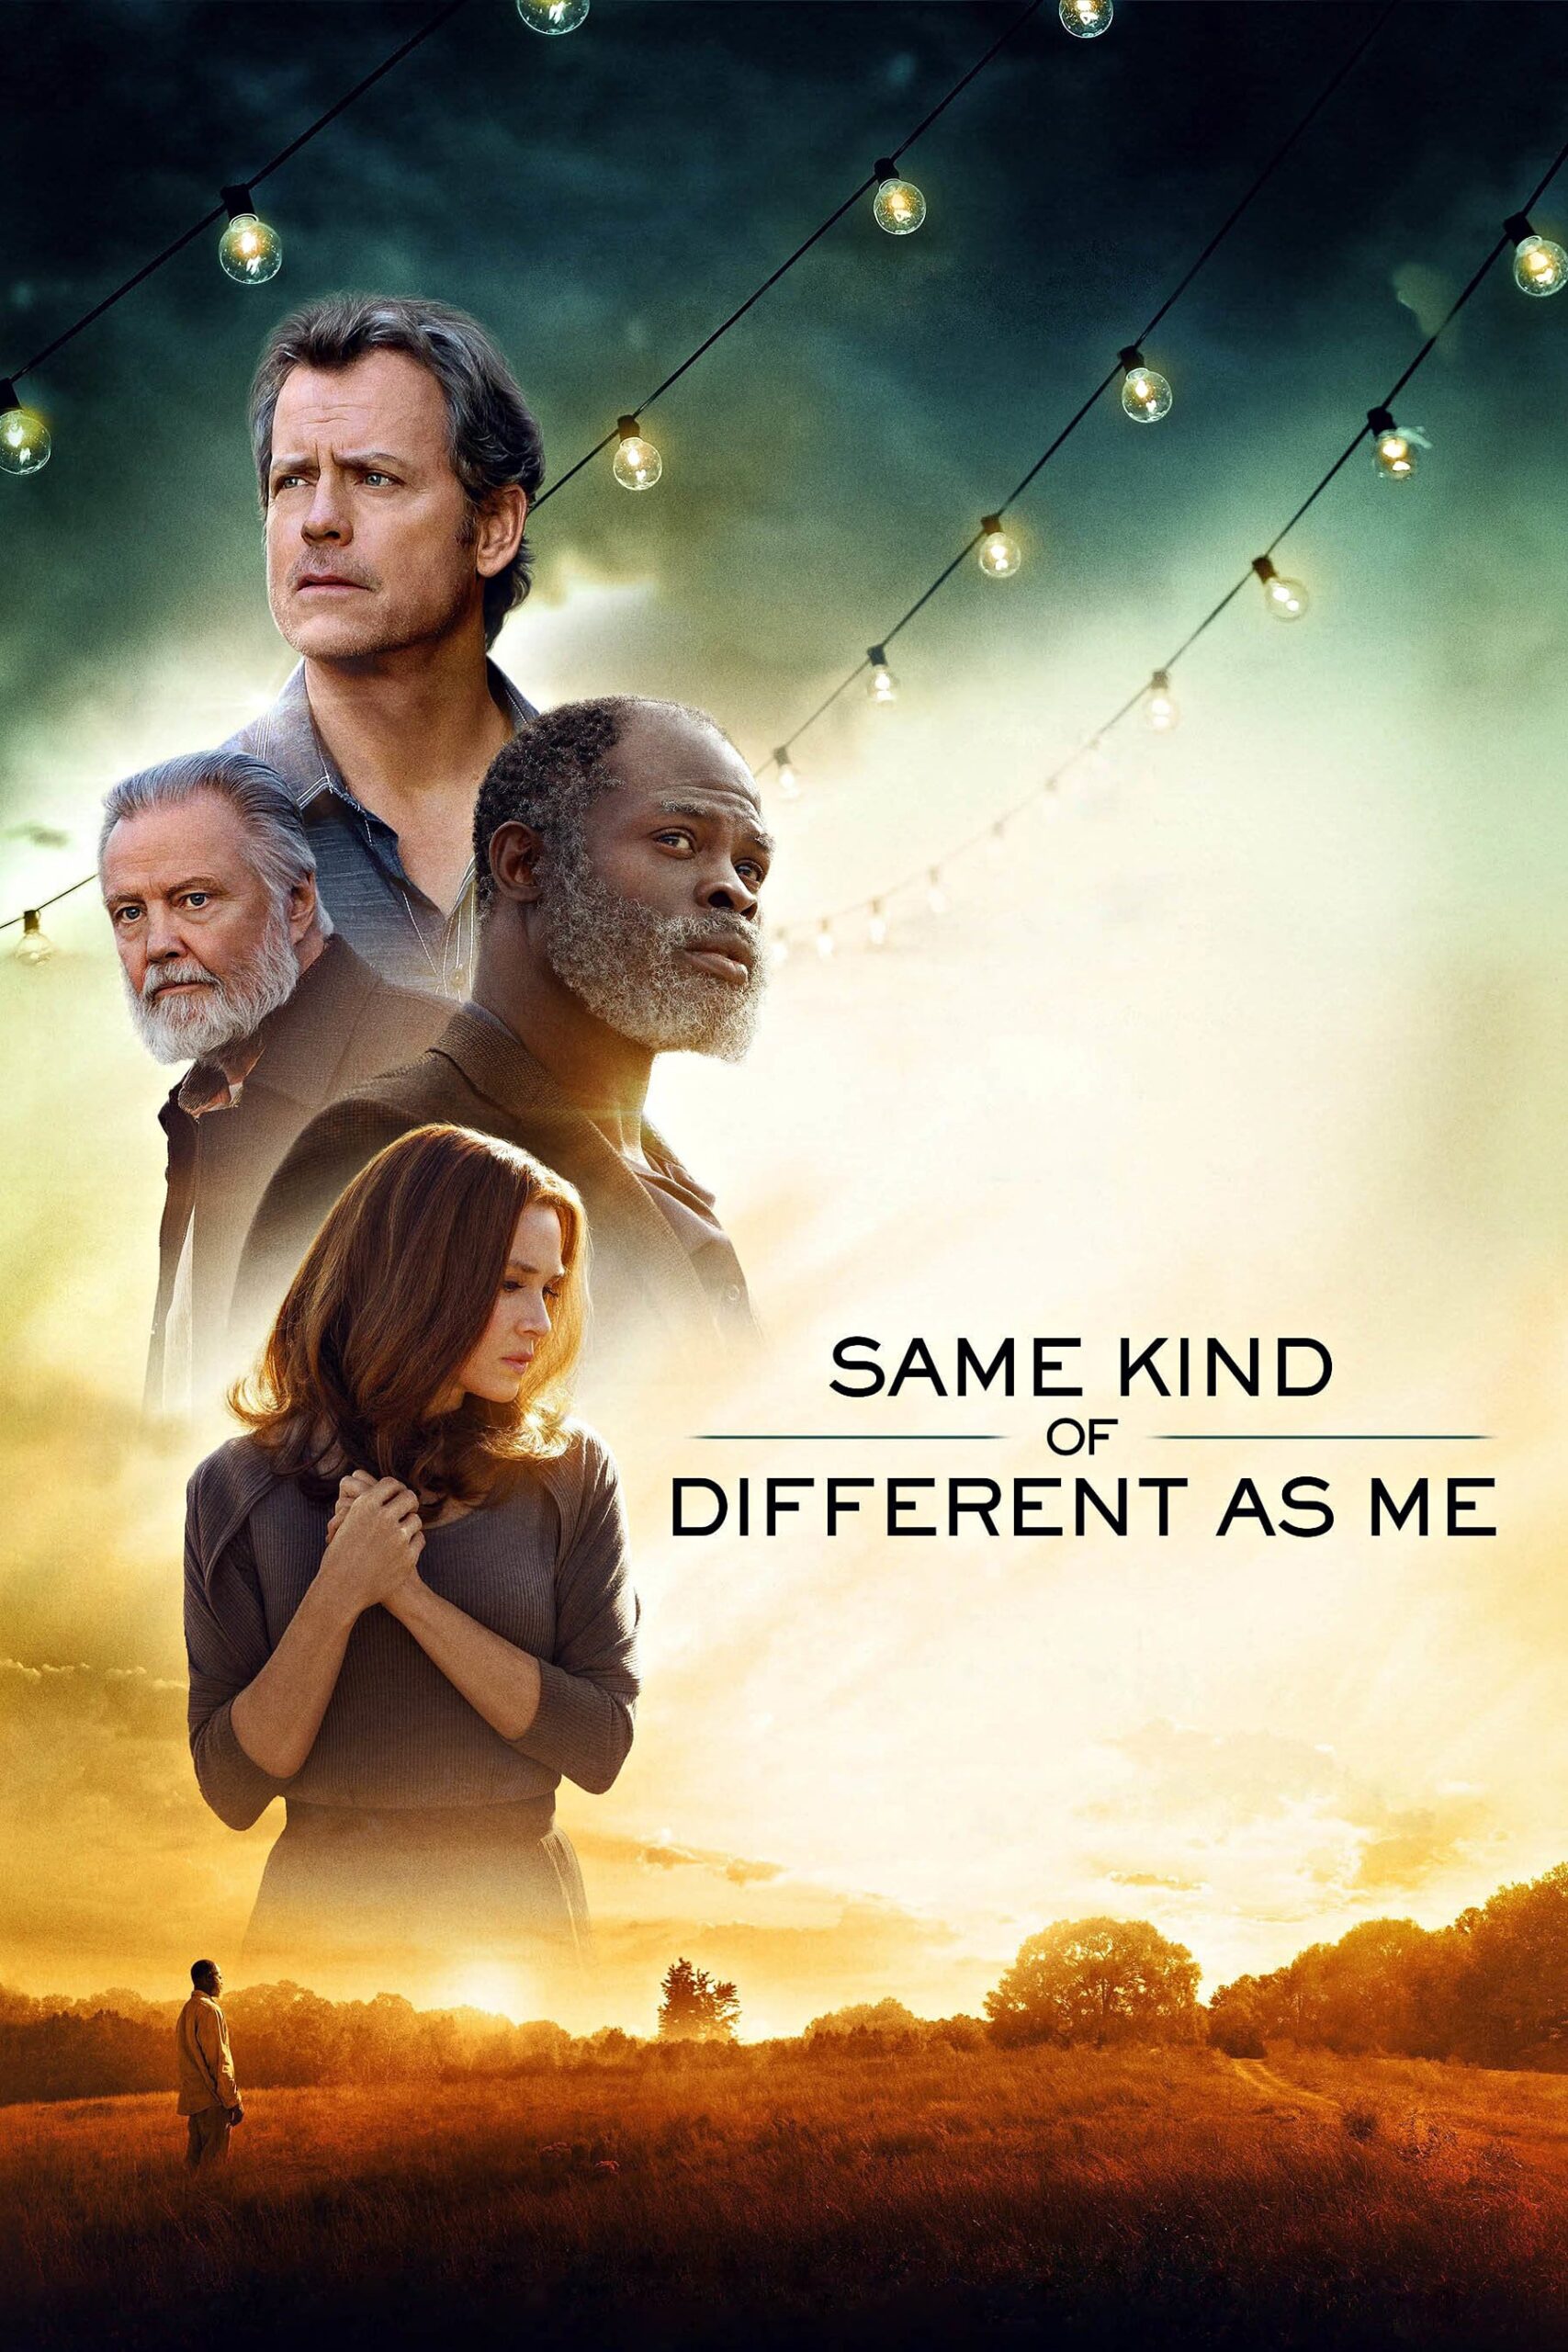 Poster for the movie "Same Kind of Different as Me"